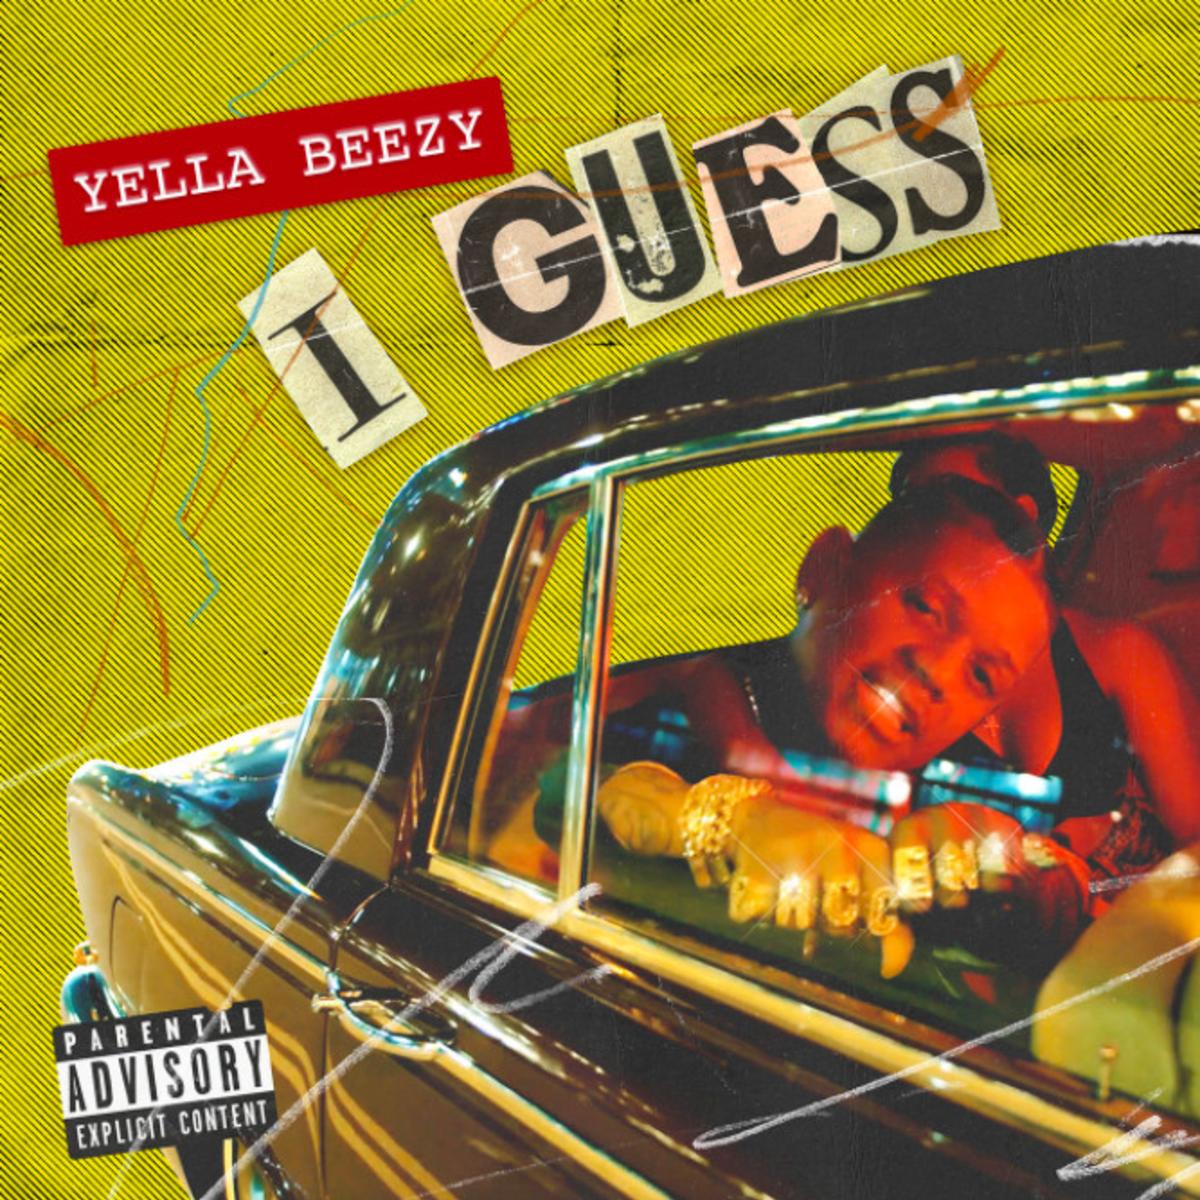 DOWNLOAD MP3: Yella Beezy - I Guess